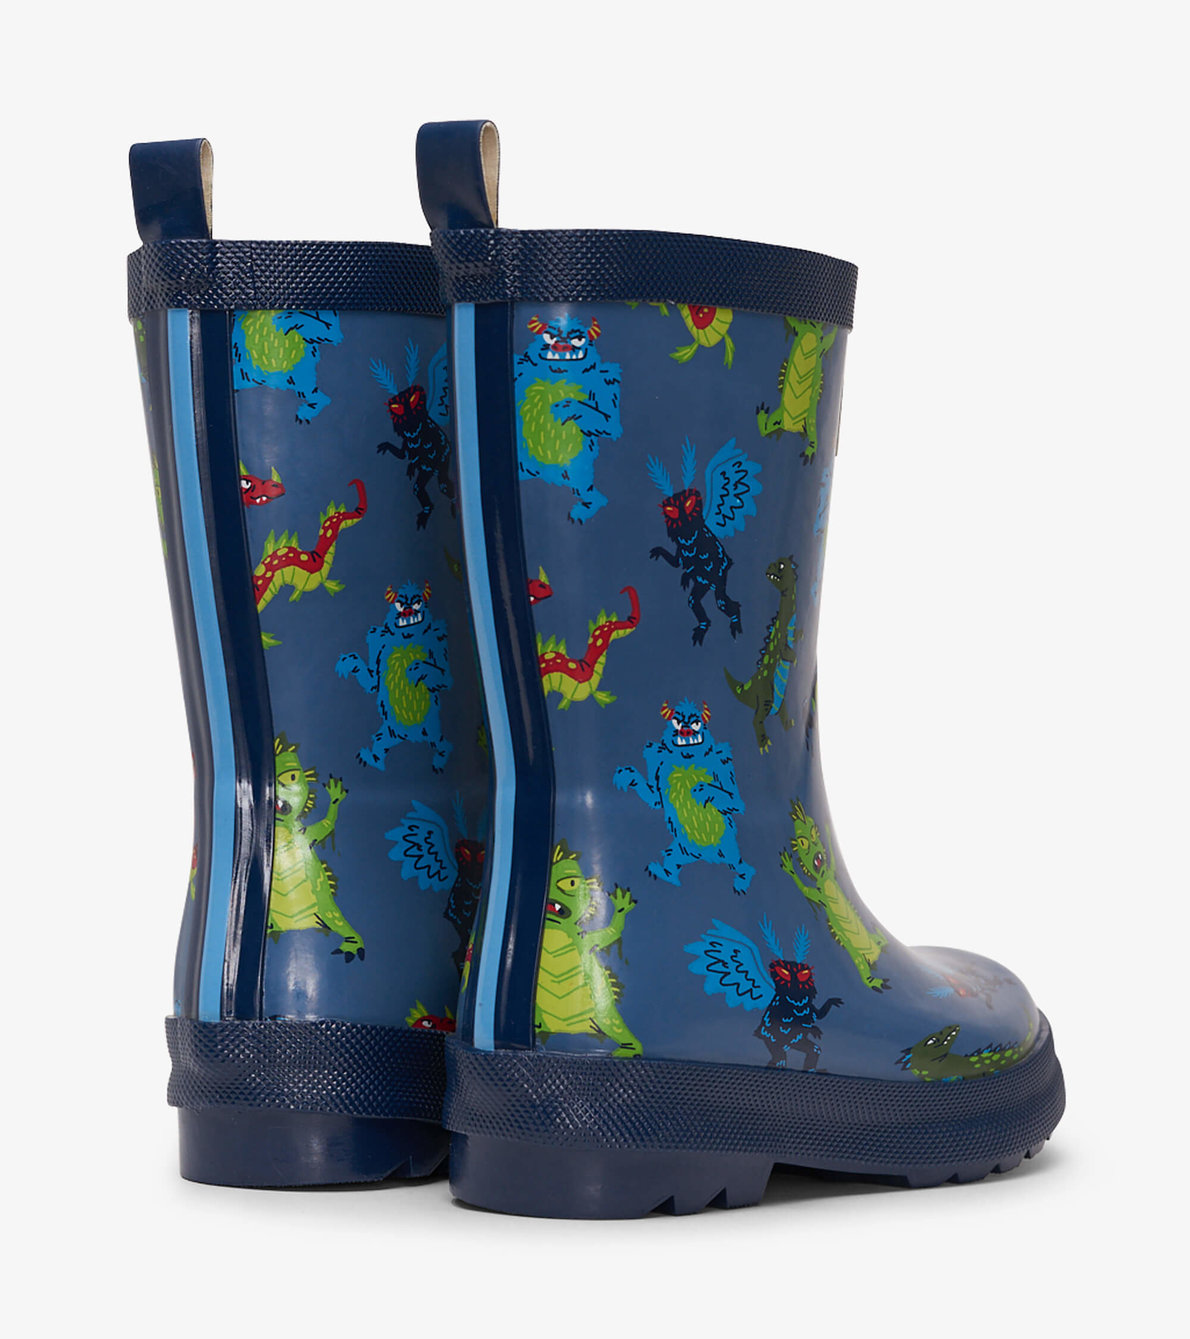 View larger image of Creepy Cryptids Shiny Wellies